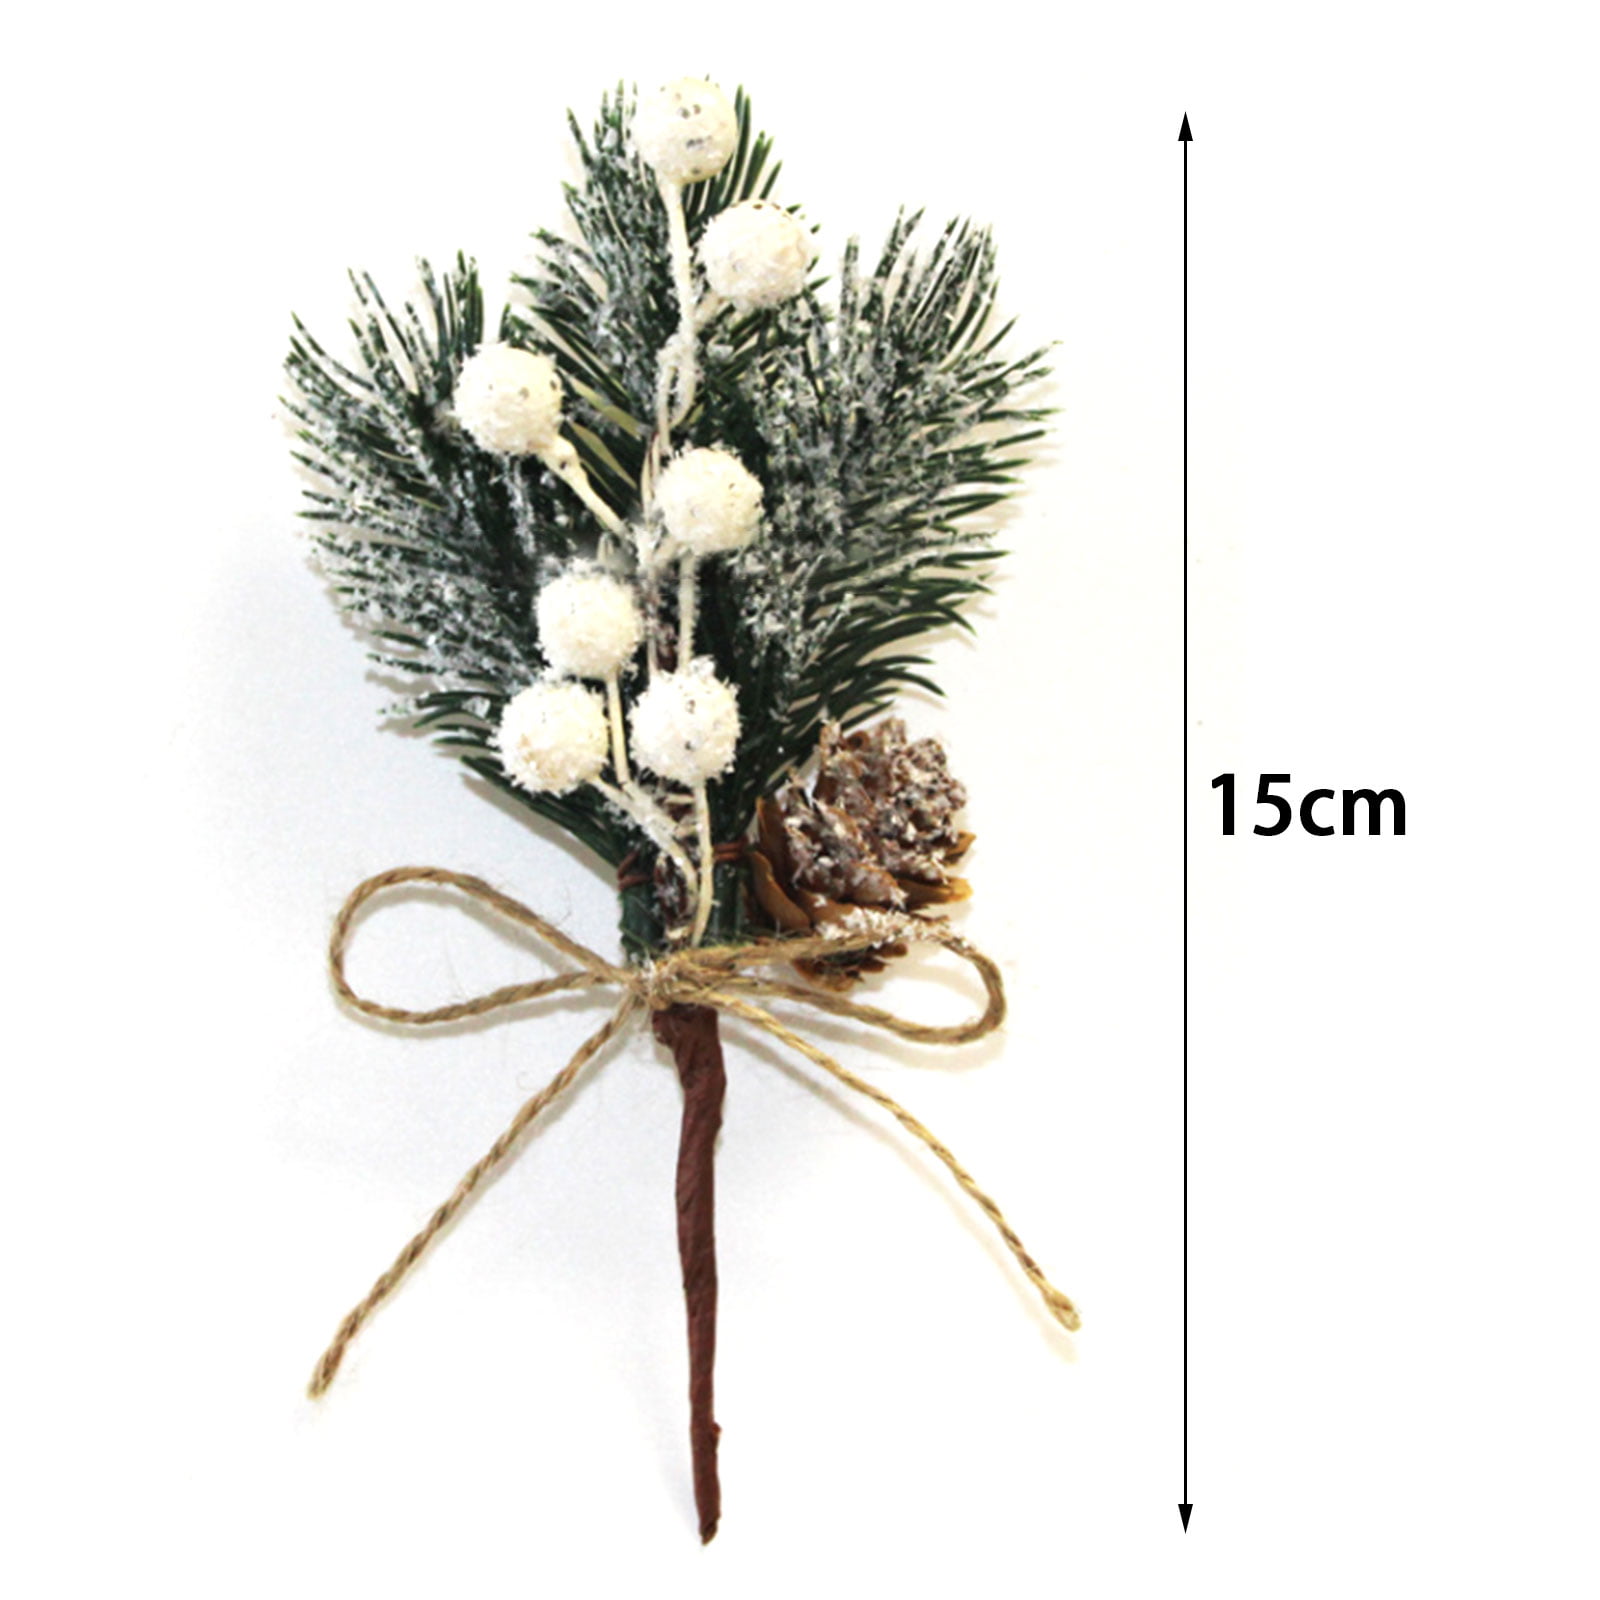 10 Pcs Mini Plastic Red Berry Stems Pine Branches Evergreen Christmas  Berries Artificial Pine Cones Branch Craft Wreath Floral Picks Holly Stem  for